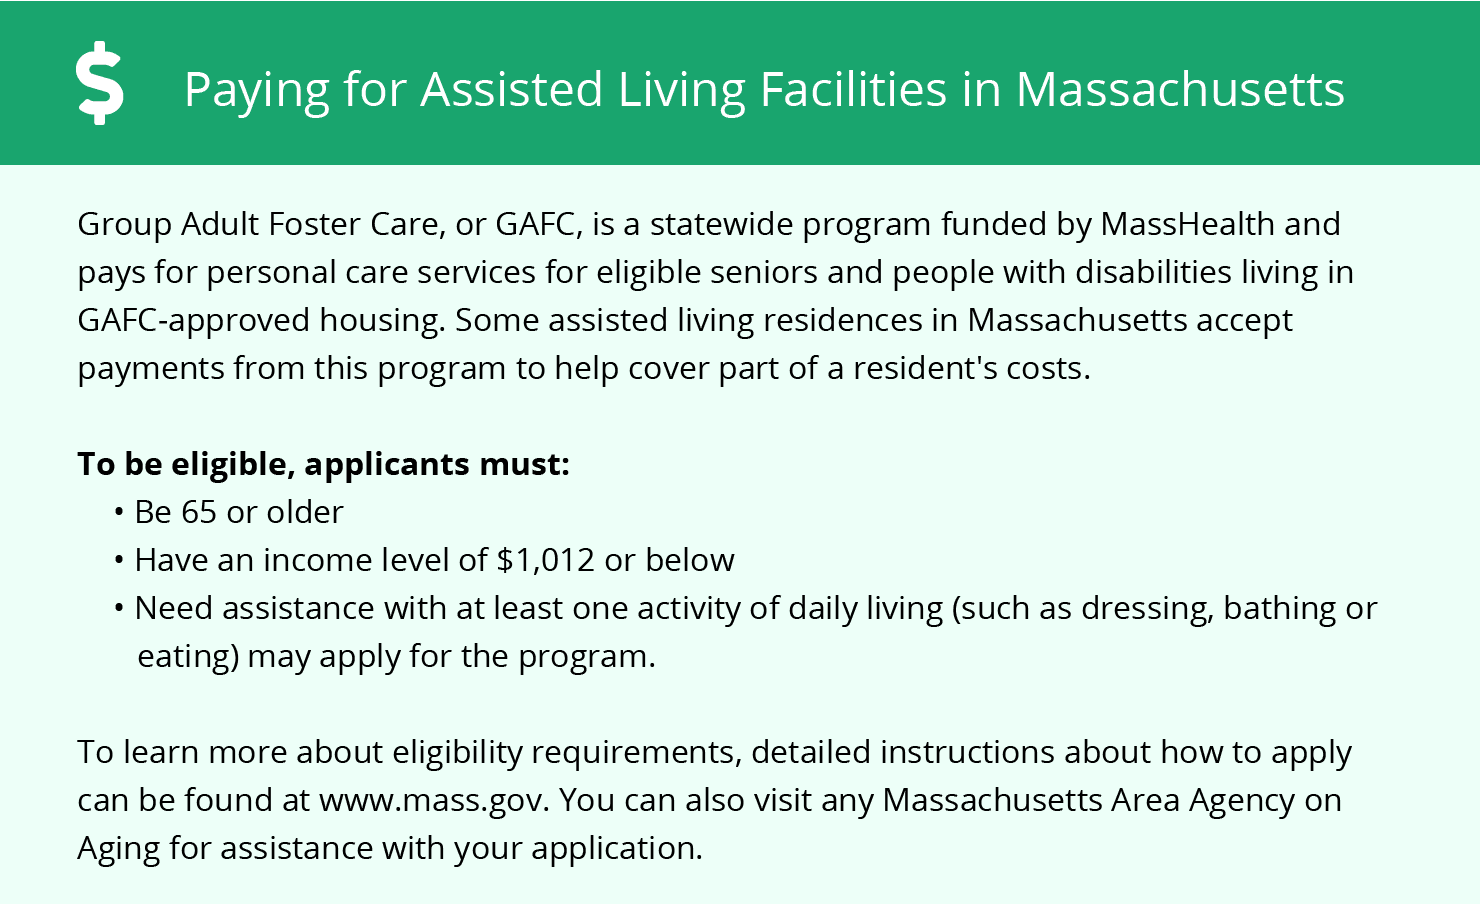 Paying for Assisted Living Facilities in Massachusetts